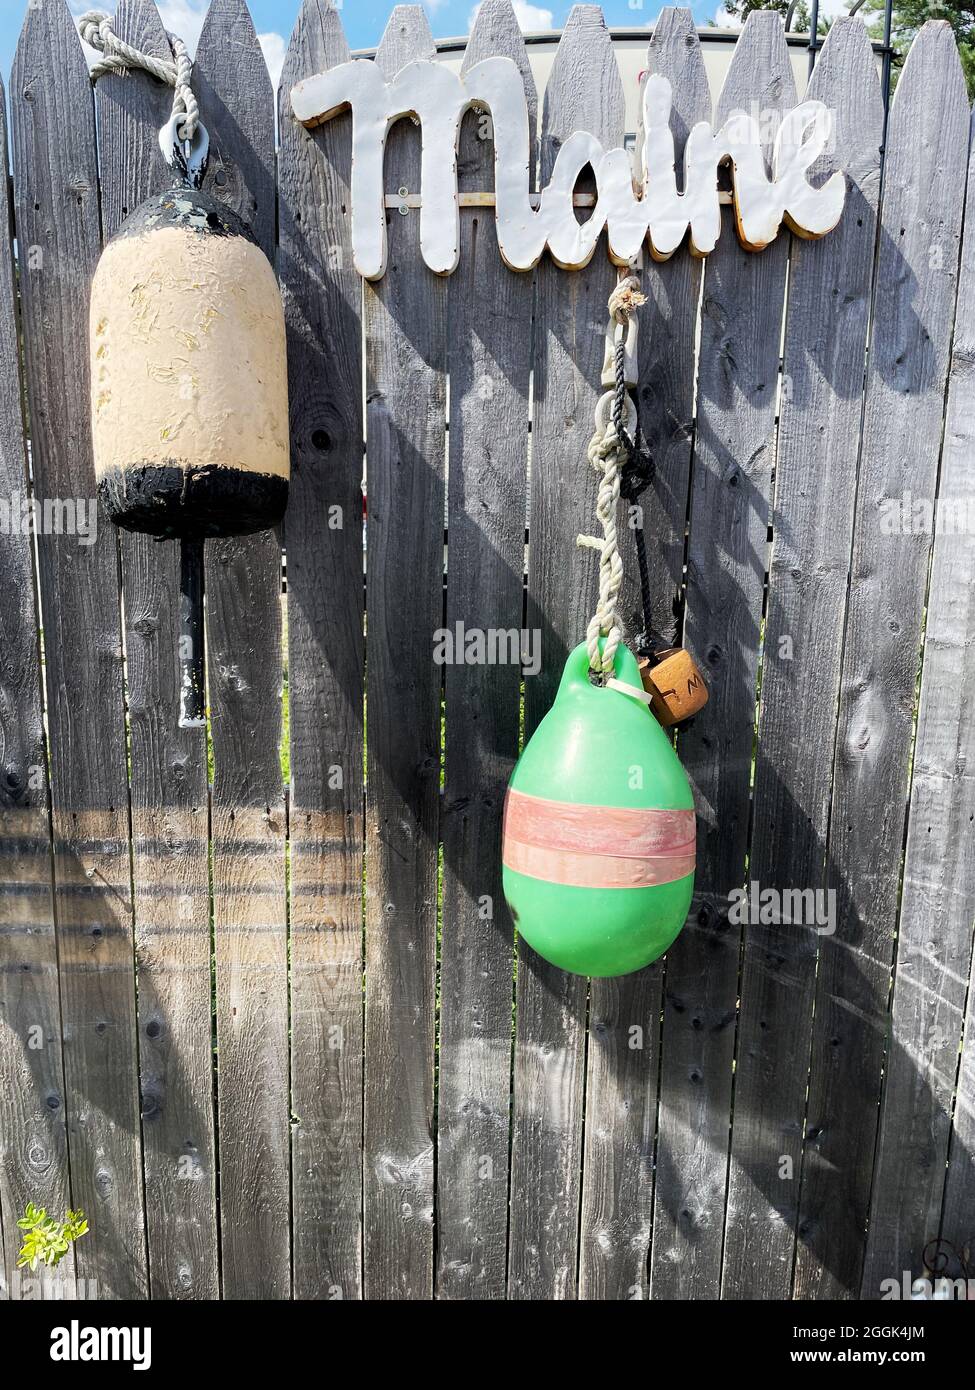 Old, weathered wooden fence with signs & buoys at Perry’s Lobster Shack is a Low-key waterside shack offering lobster & seafood plates. Stock Photo